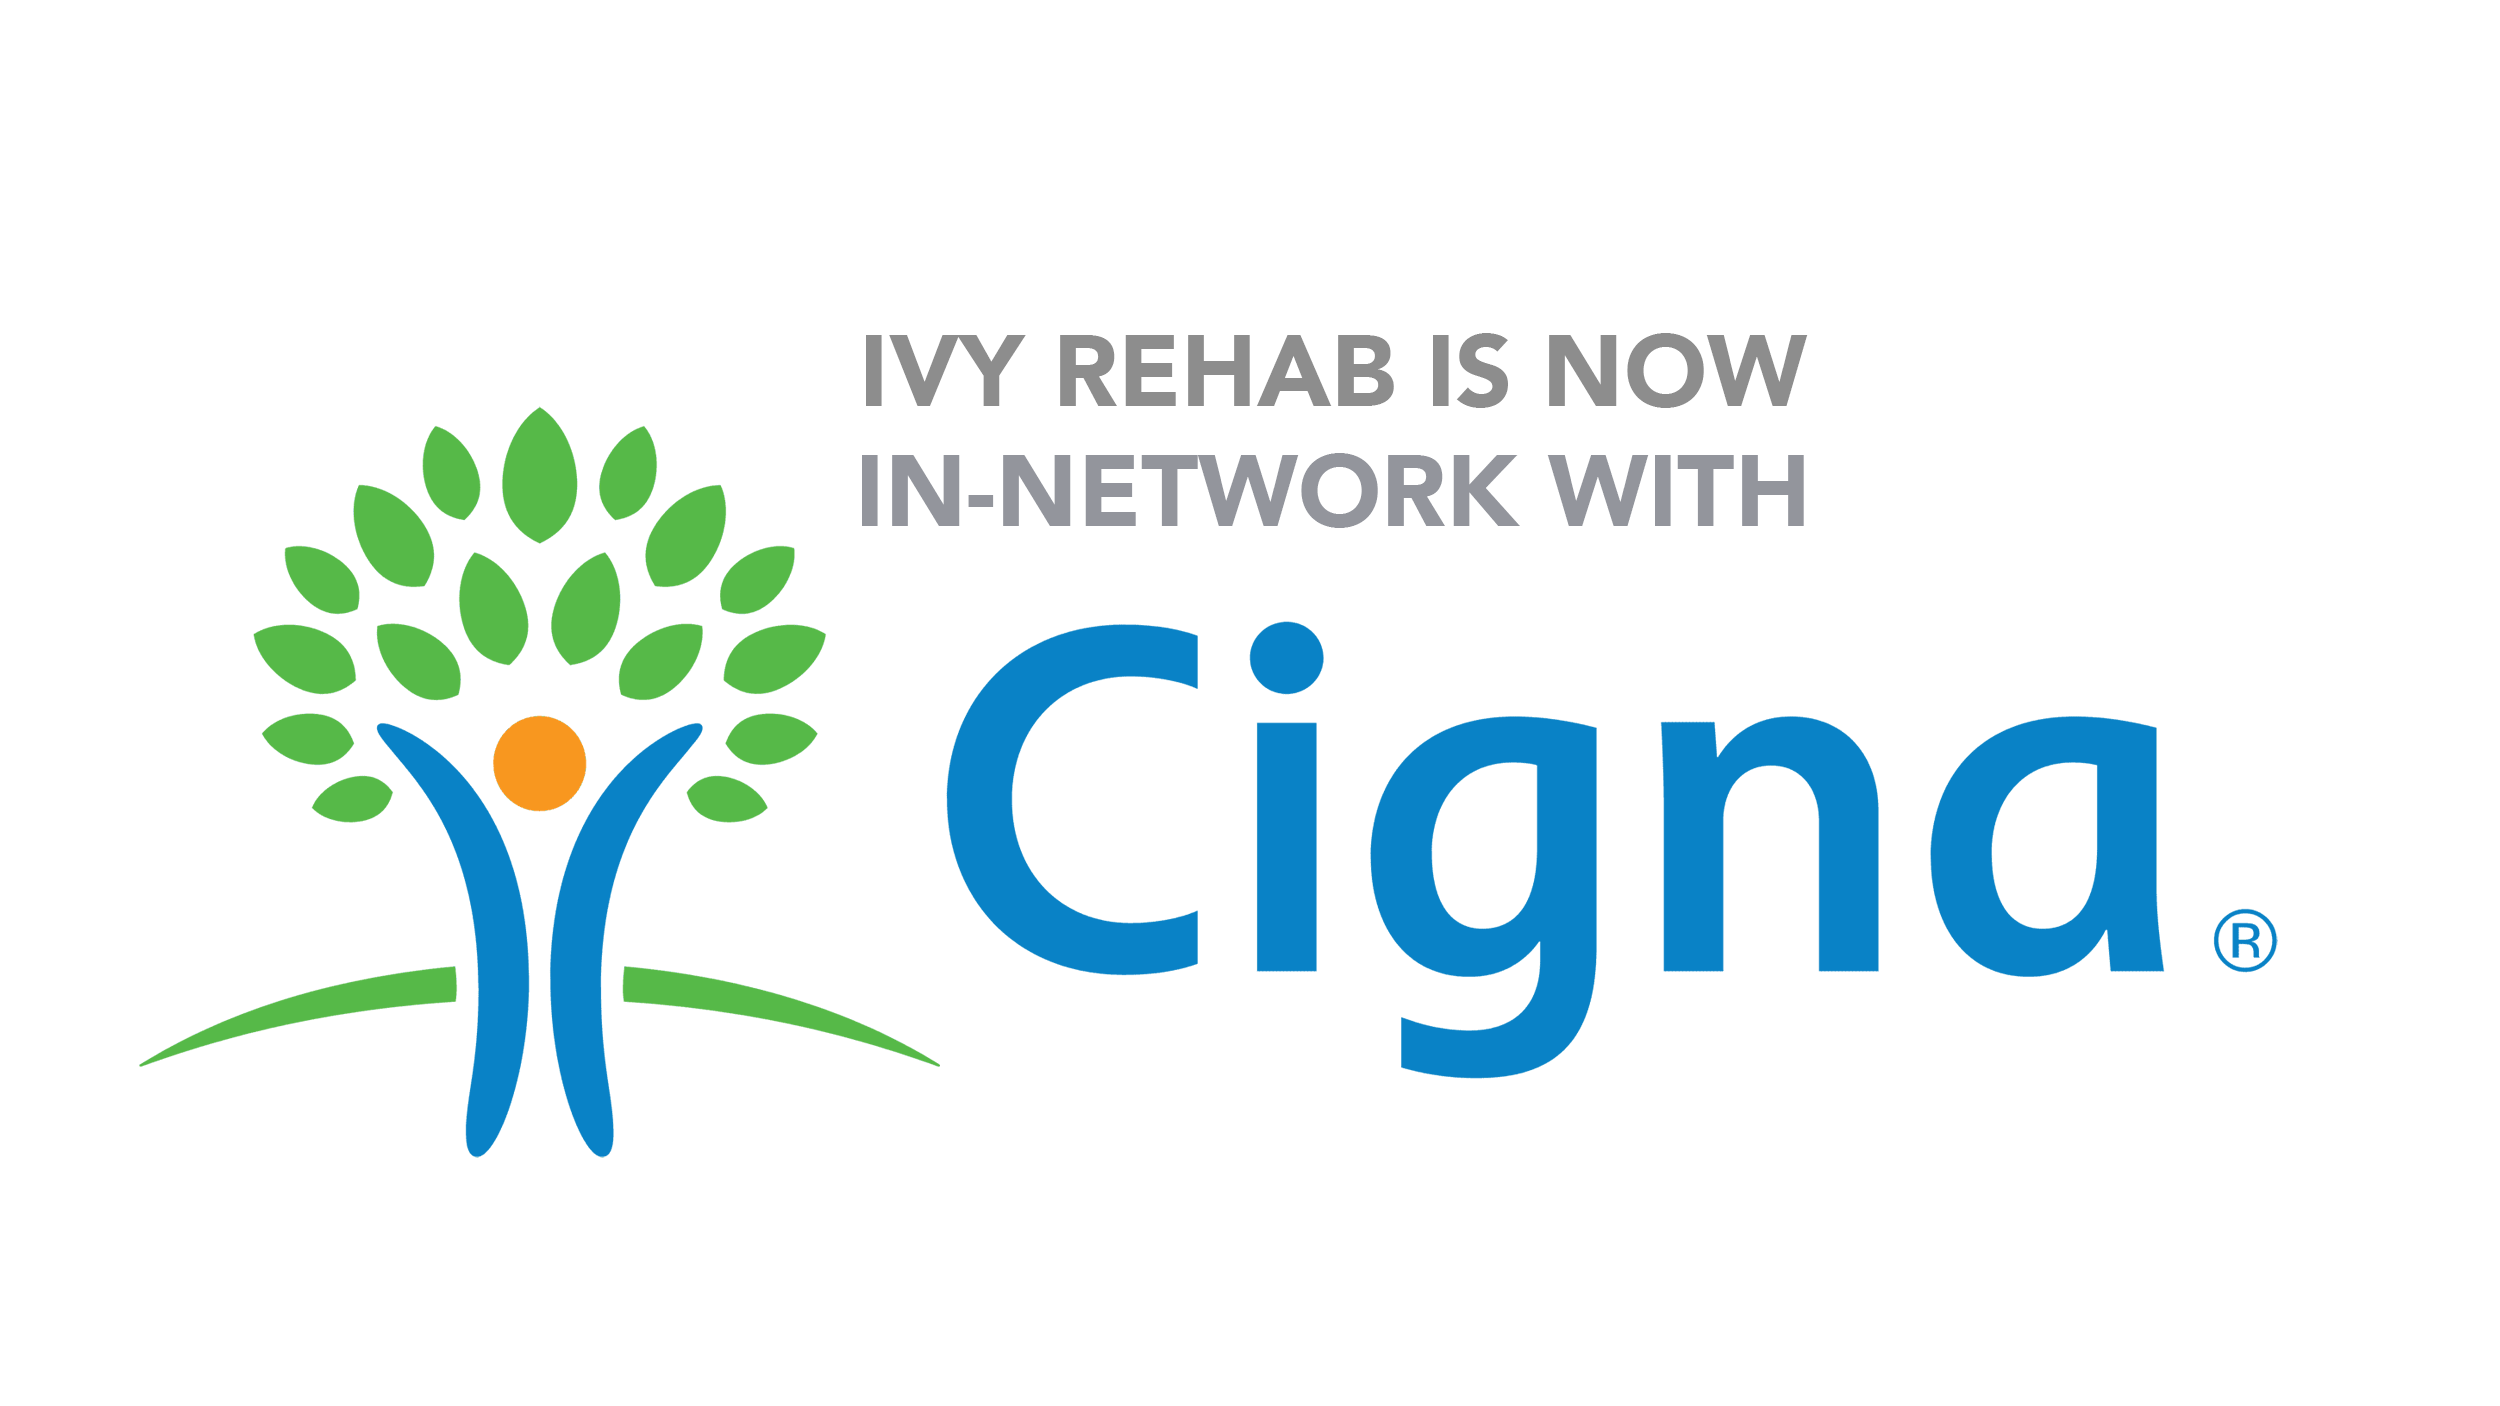 Ivy Rehab Joins Cigna as an In-Network Provider